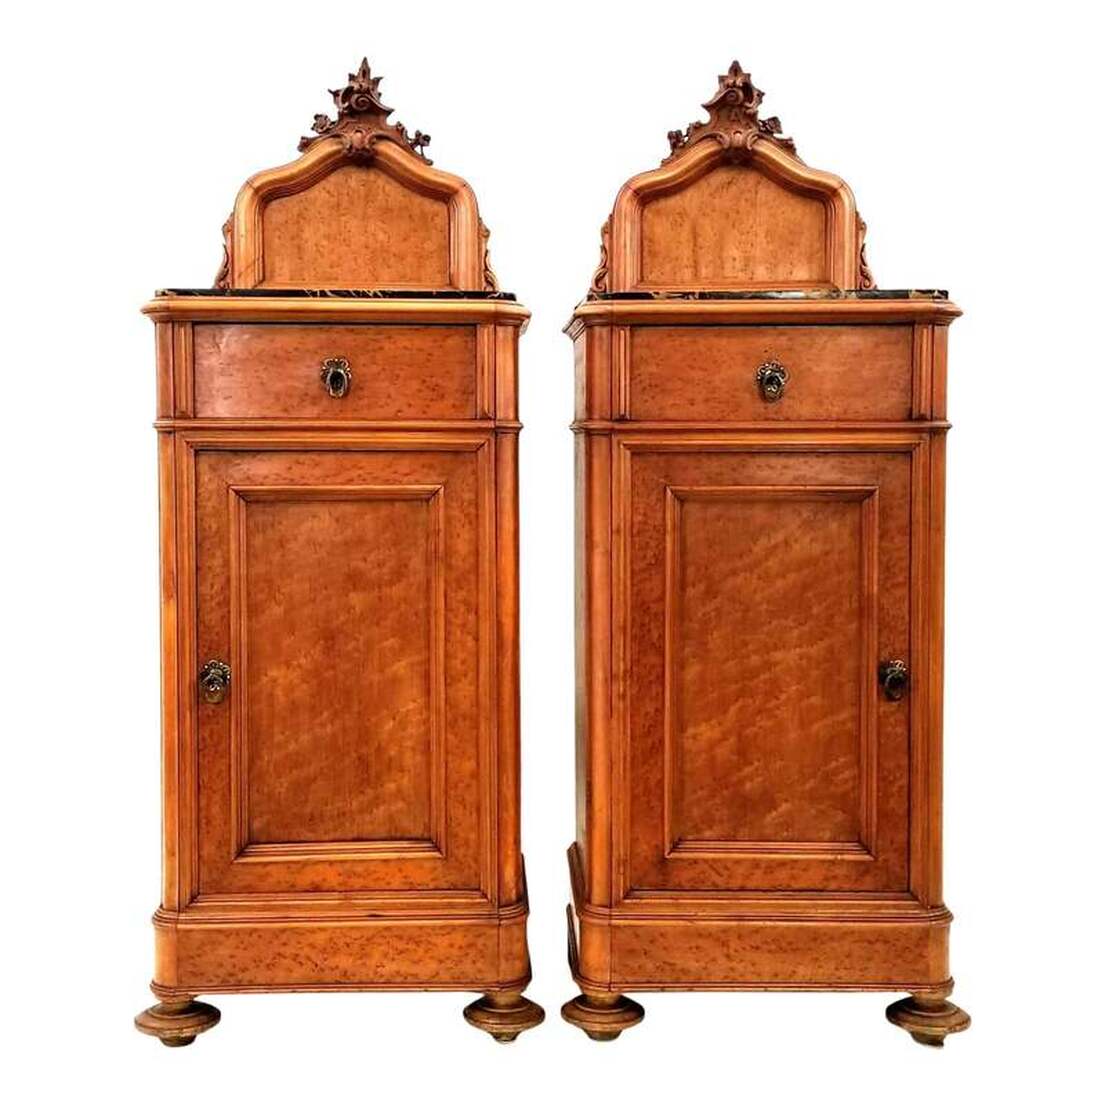 Antique pair of somnoe, or half commodes, are ideal for use as bedside cabinets or nightstands.  The pair was made in Northwestern Italy between the 1830s and the 1870s during the Rococo Revival period of the nineteenth century.  The nightstands are constructed of Birdseye Maple wood and trimmed with burled maple wood.  The nightstands are topped with Portoro limestone from Porto Venere, Ligeria, Italy ( also from La Spezia and Lerici on the Italian Riviera ), where it has been quarried sporadically since the 16th century and exported worldwide.  The limestone is black with white calcite filled veins and stylolites and sinuous wider veins and pods of yellow calcite colored by geothite ( iron hydroxide ).  Above the limestone tops are carved rocaille crests, reminiscent of the German muschelwerk, featuring scrolls and foliates. On either side of the crests are scroll and leaf supports.  The corners are rounded and the stiles are molded cyma curves, both popular features in France during the reign of Louis-Philippe ( 1830 - 1848 ).  The top drawers show hand cutting, planing, and dovetailing on the fronts and backs.  The bottom cabinet interiors each feature one shelf and are accessed by opening the inset panel single doors.  Under the bottom front are turned bun feet and under the back are block feet.  Cabinets will complement interiors decorated with elements of Louis-Philippe, Biedermeier, French Rococo, Venetian Baroque, Victorian, and Italian Grotto.  Size:  20